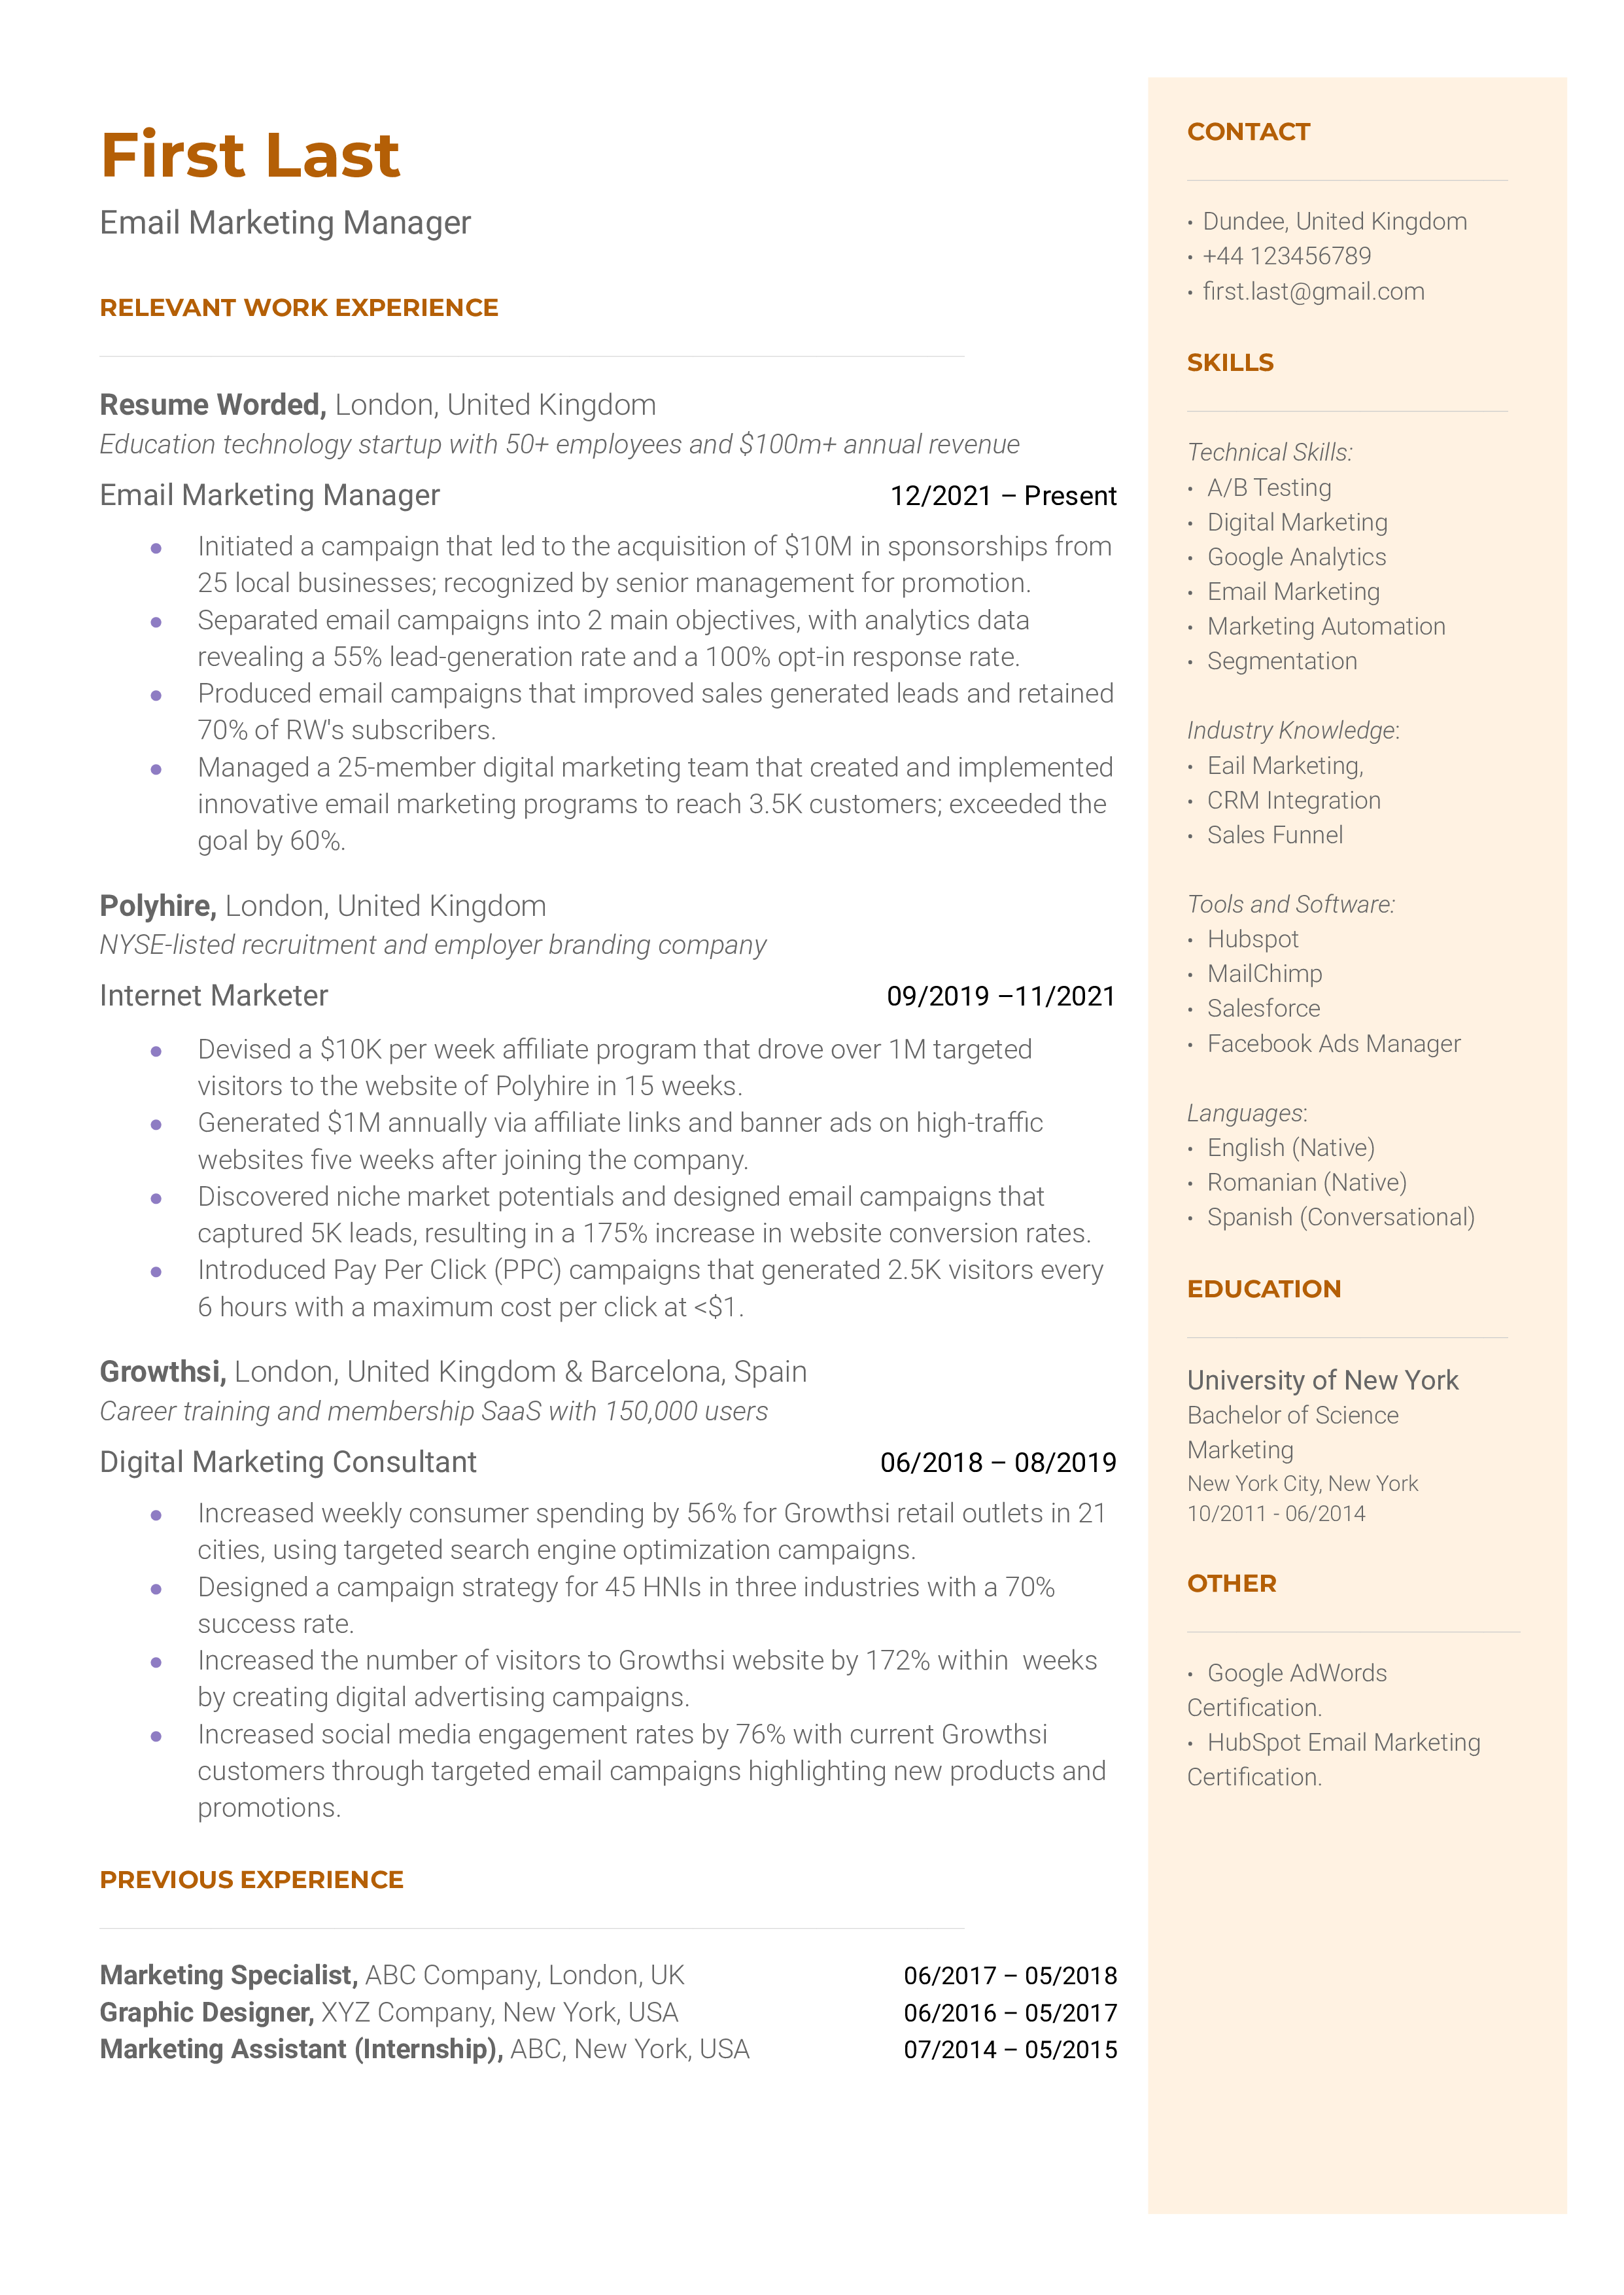 Email marketing manager resume sample that highlights the applicant’s marketing experience and tools.